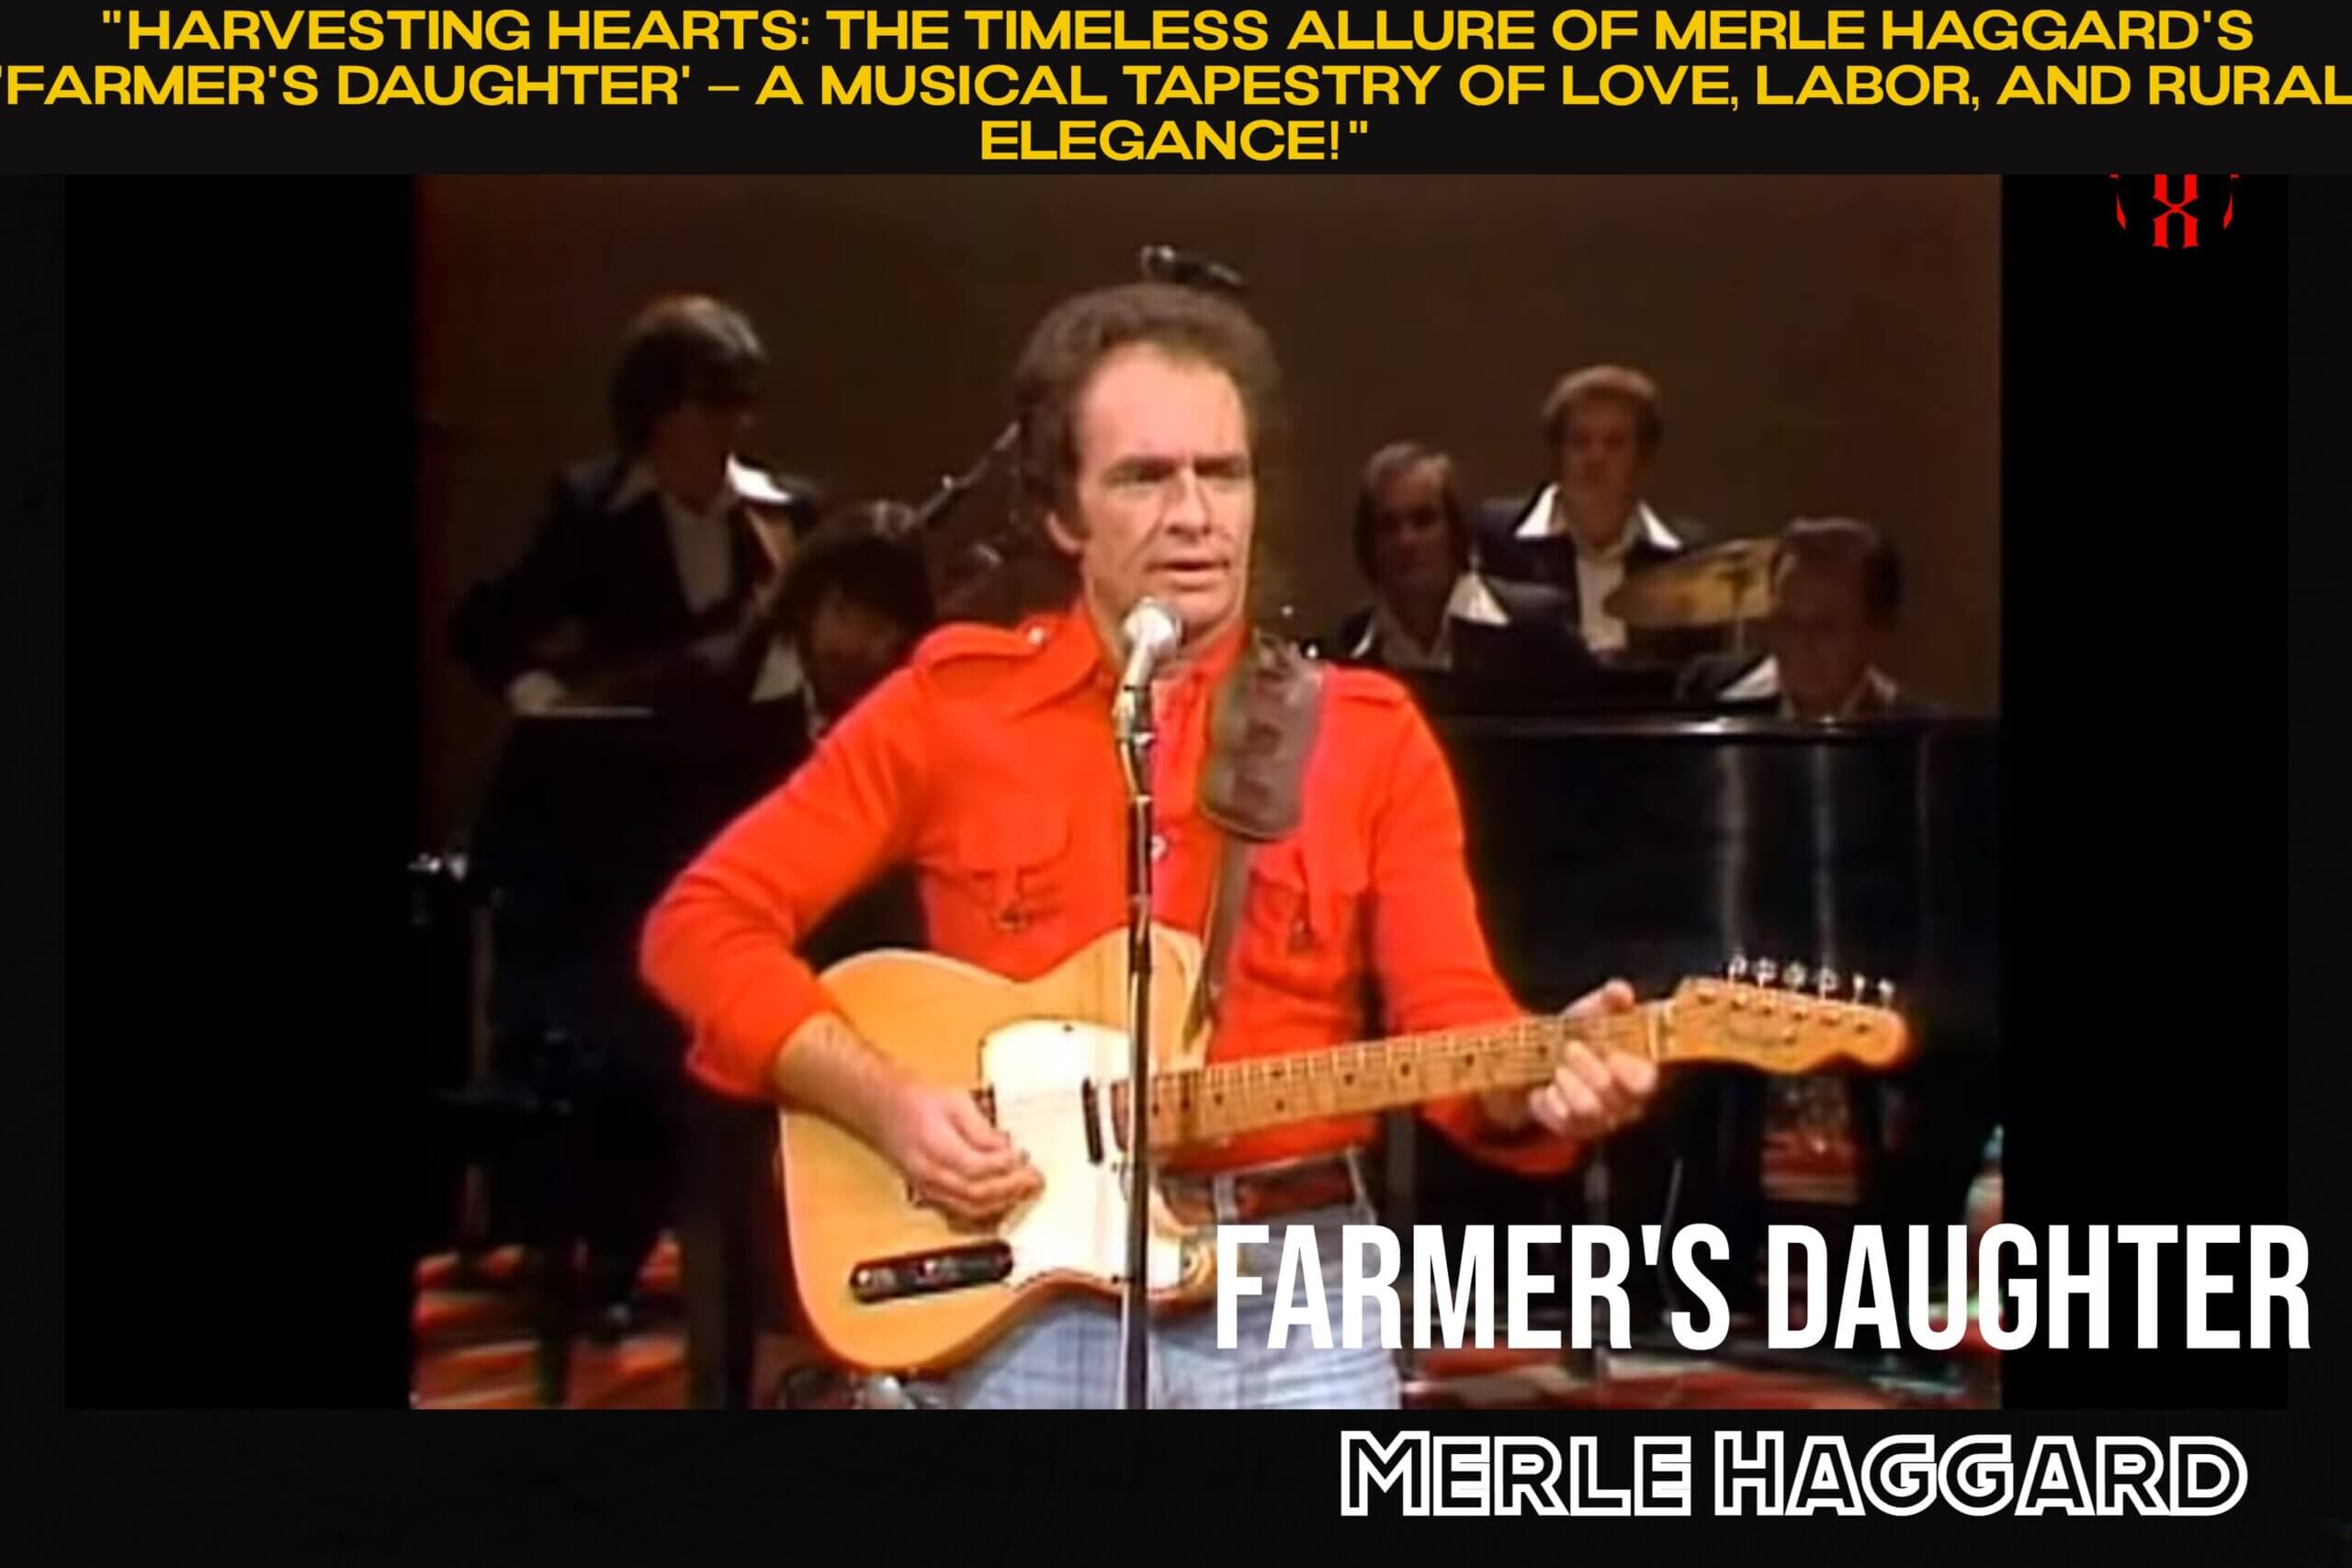 “Harvesting Hearts: The Timeless Allure of Merle Haggard’s ‘Farmer’s Daughter’ – A Musical Tapestry of Love, Labor, and Rural Elegance!”